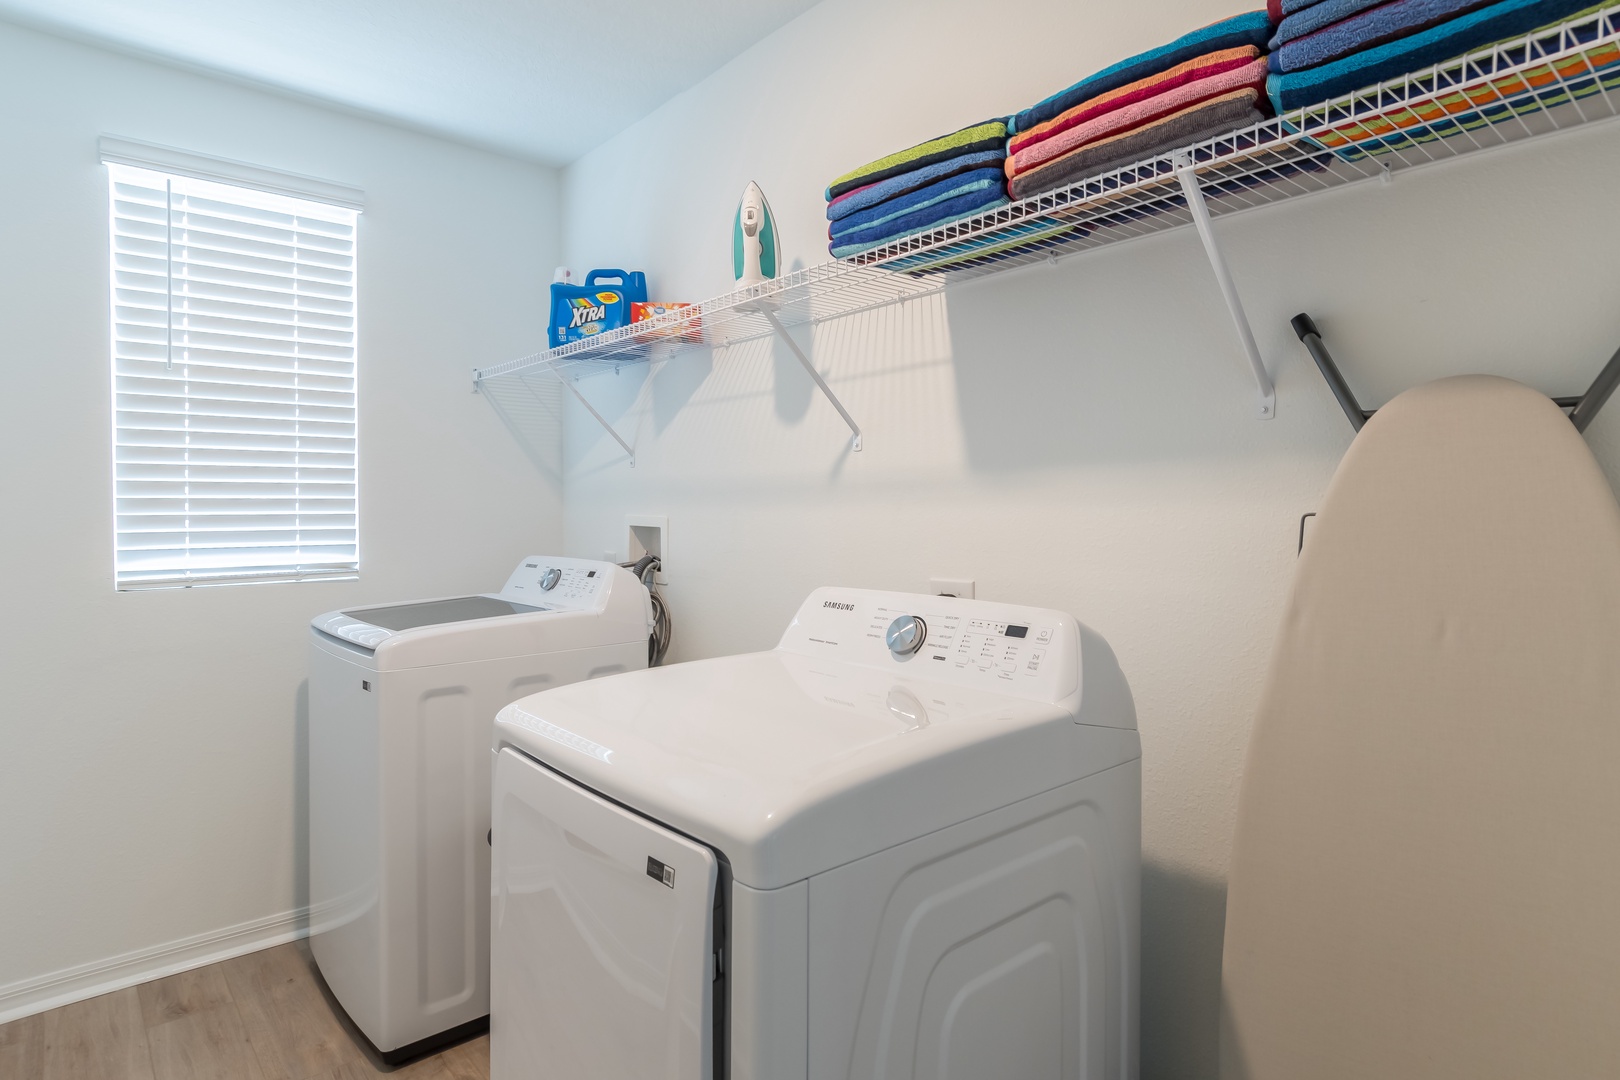 Private laundry is available for your stay, located on the second floor